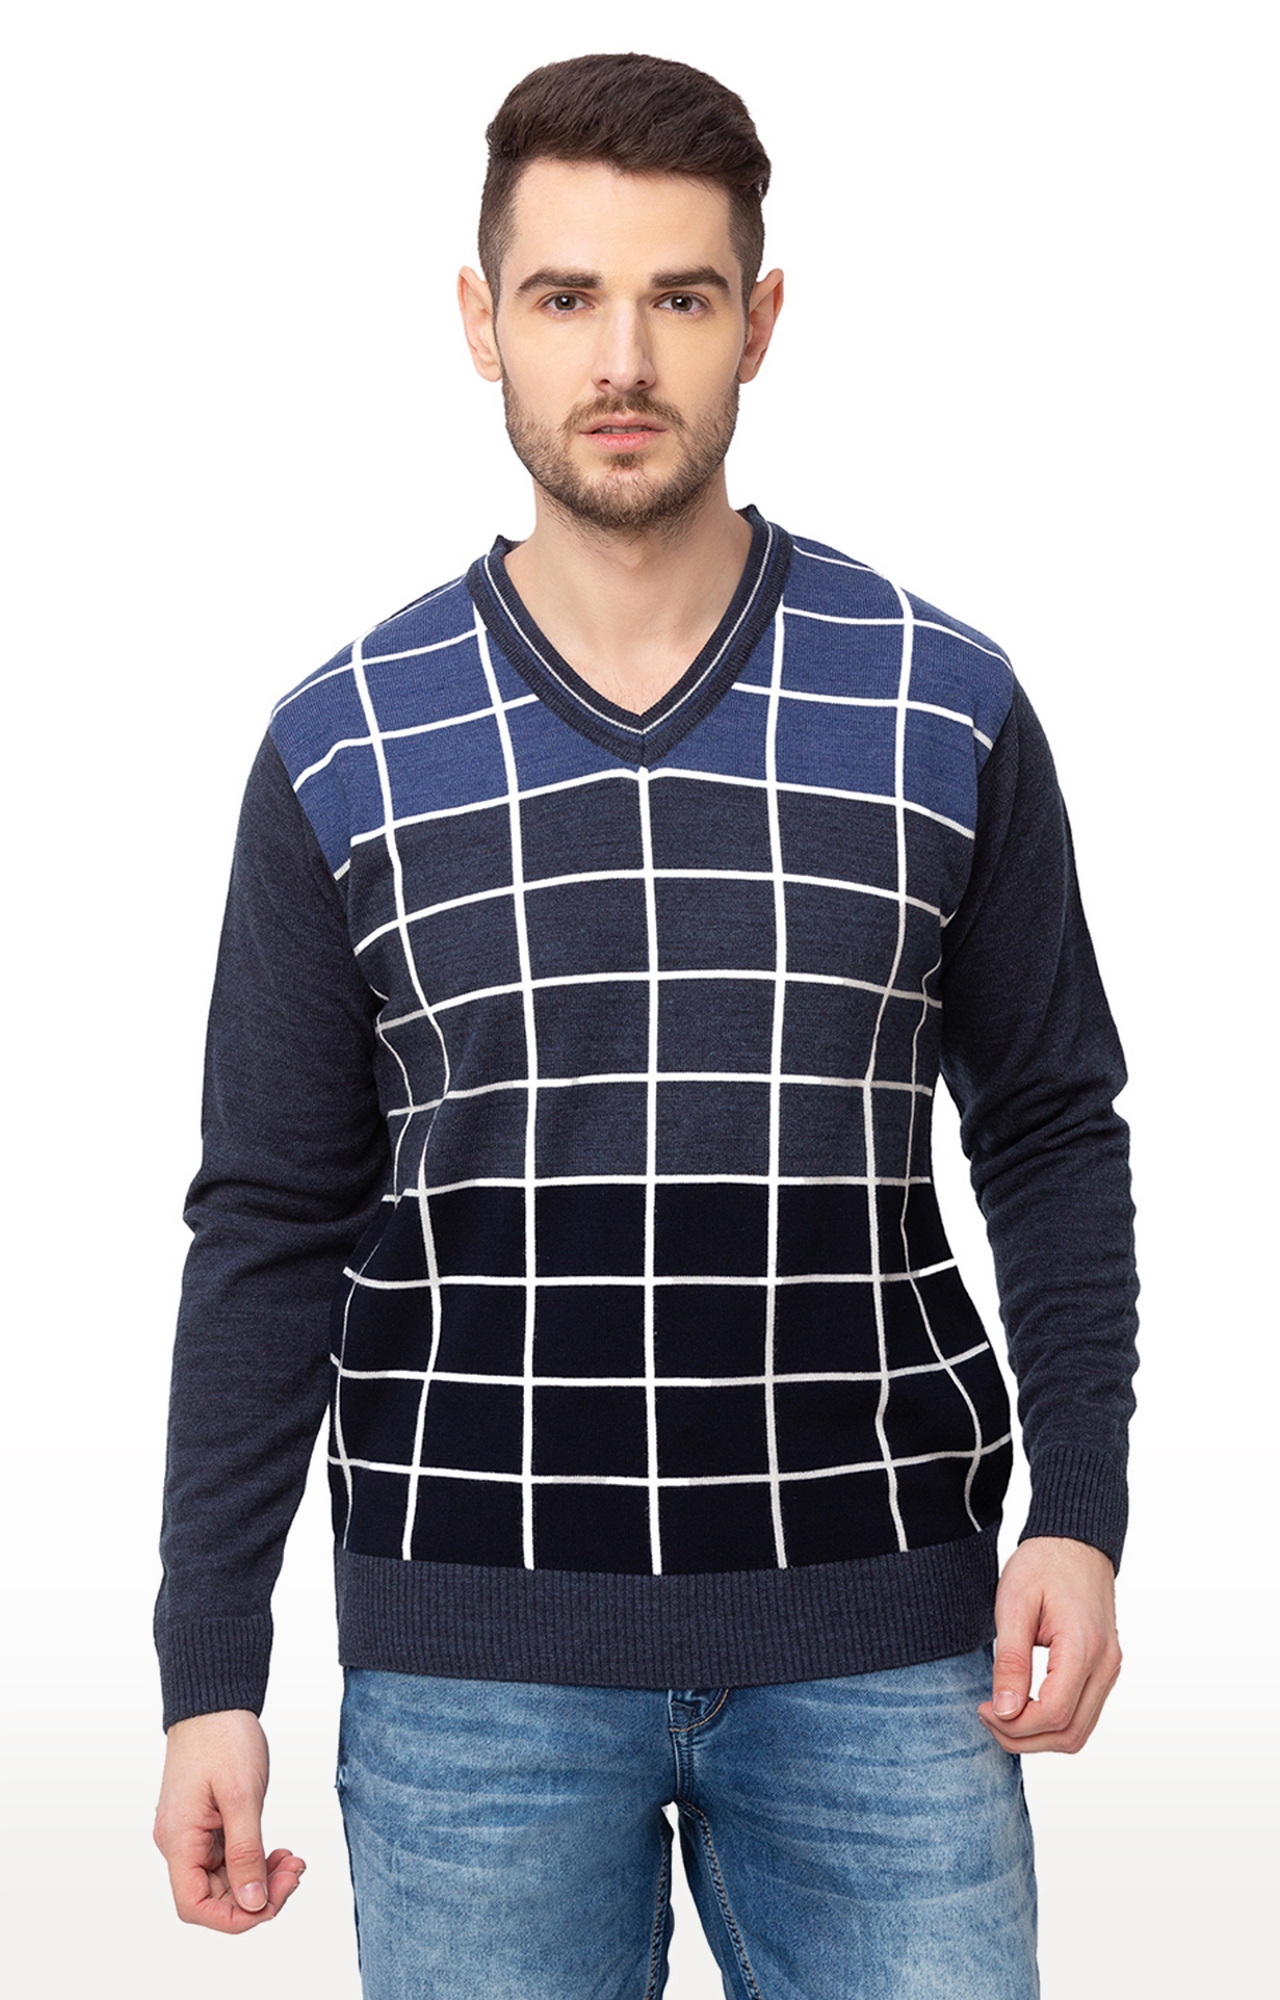 globus | Blue Checked Sweater